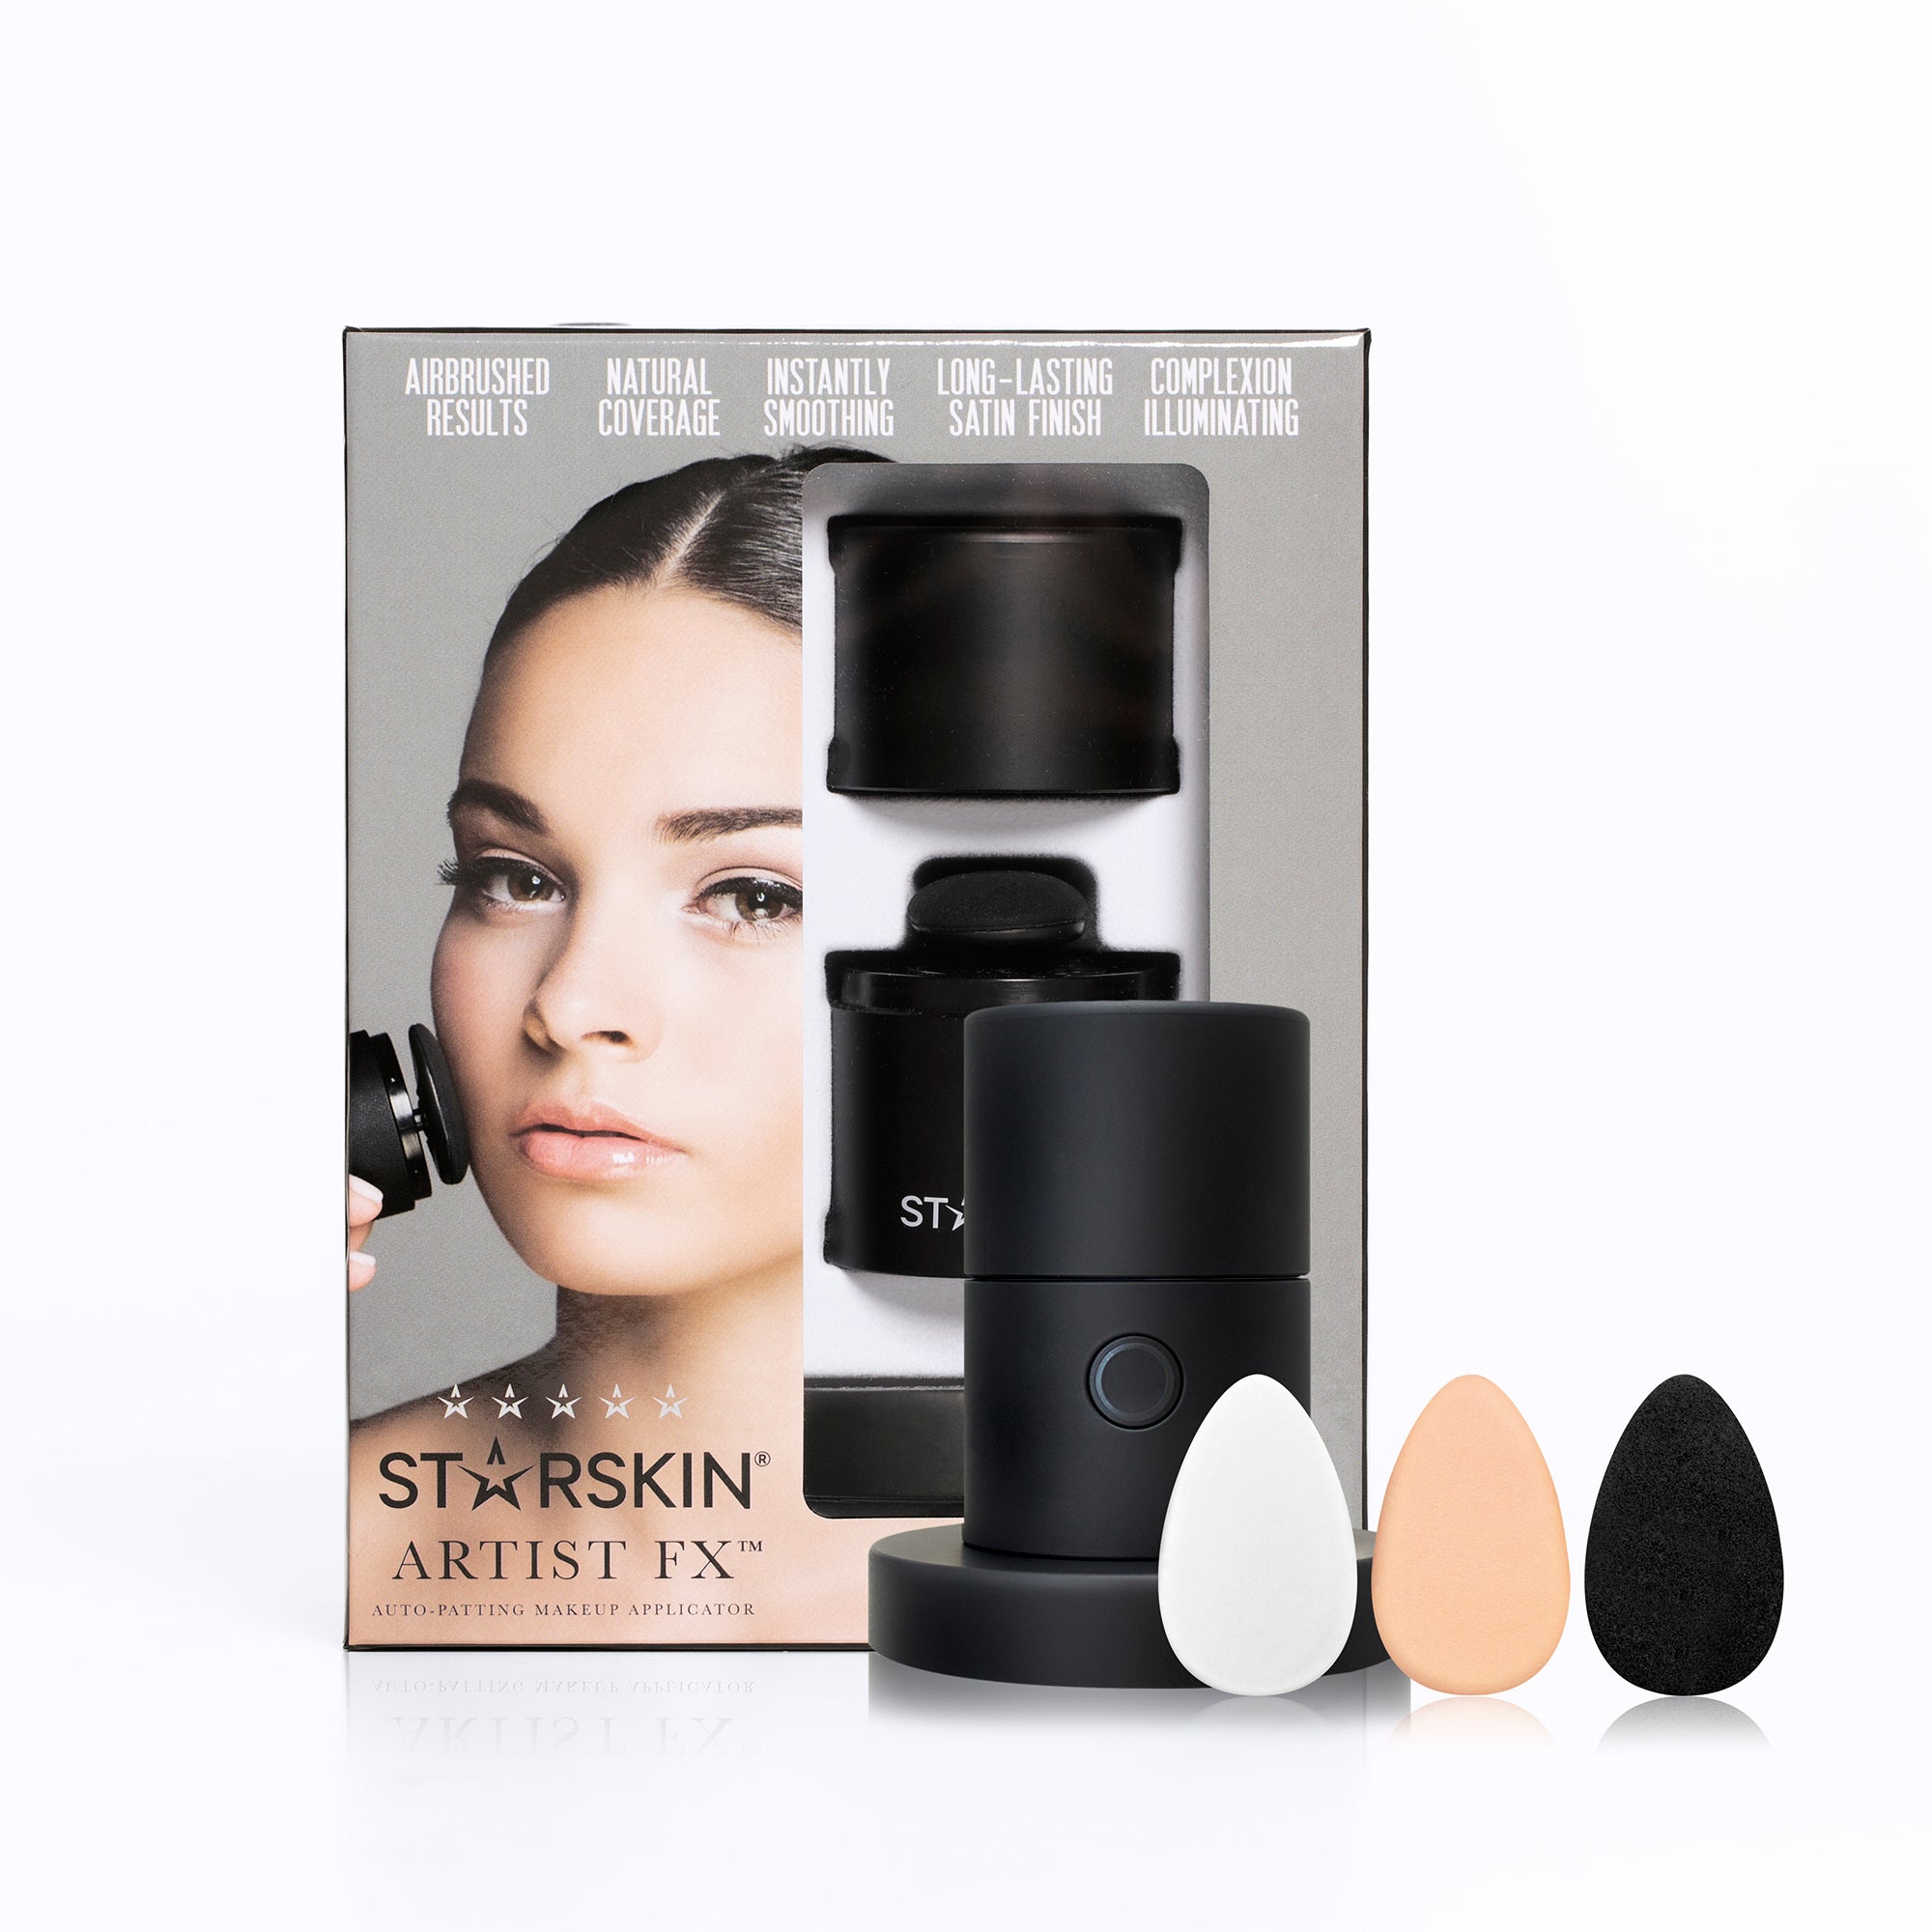 Artist FX Limited Edition From Starskin product picture front